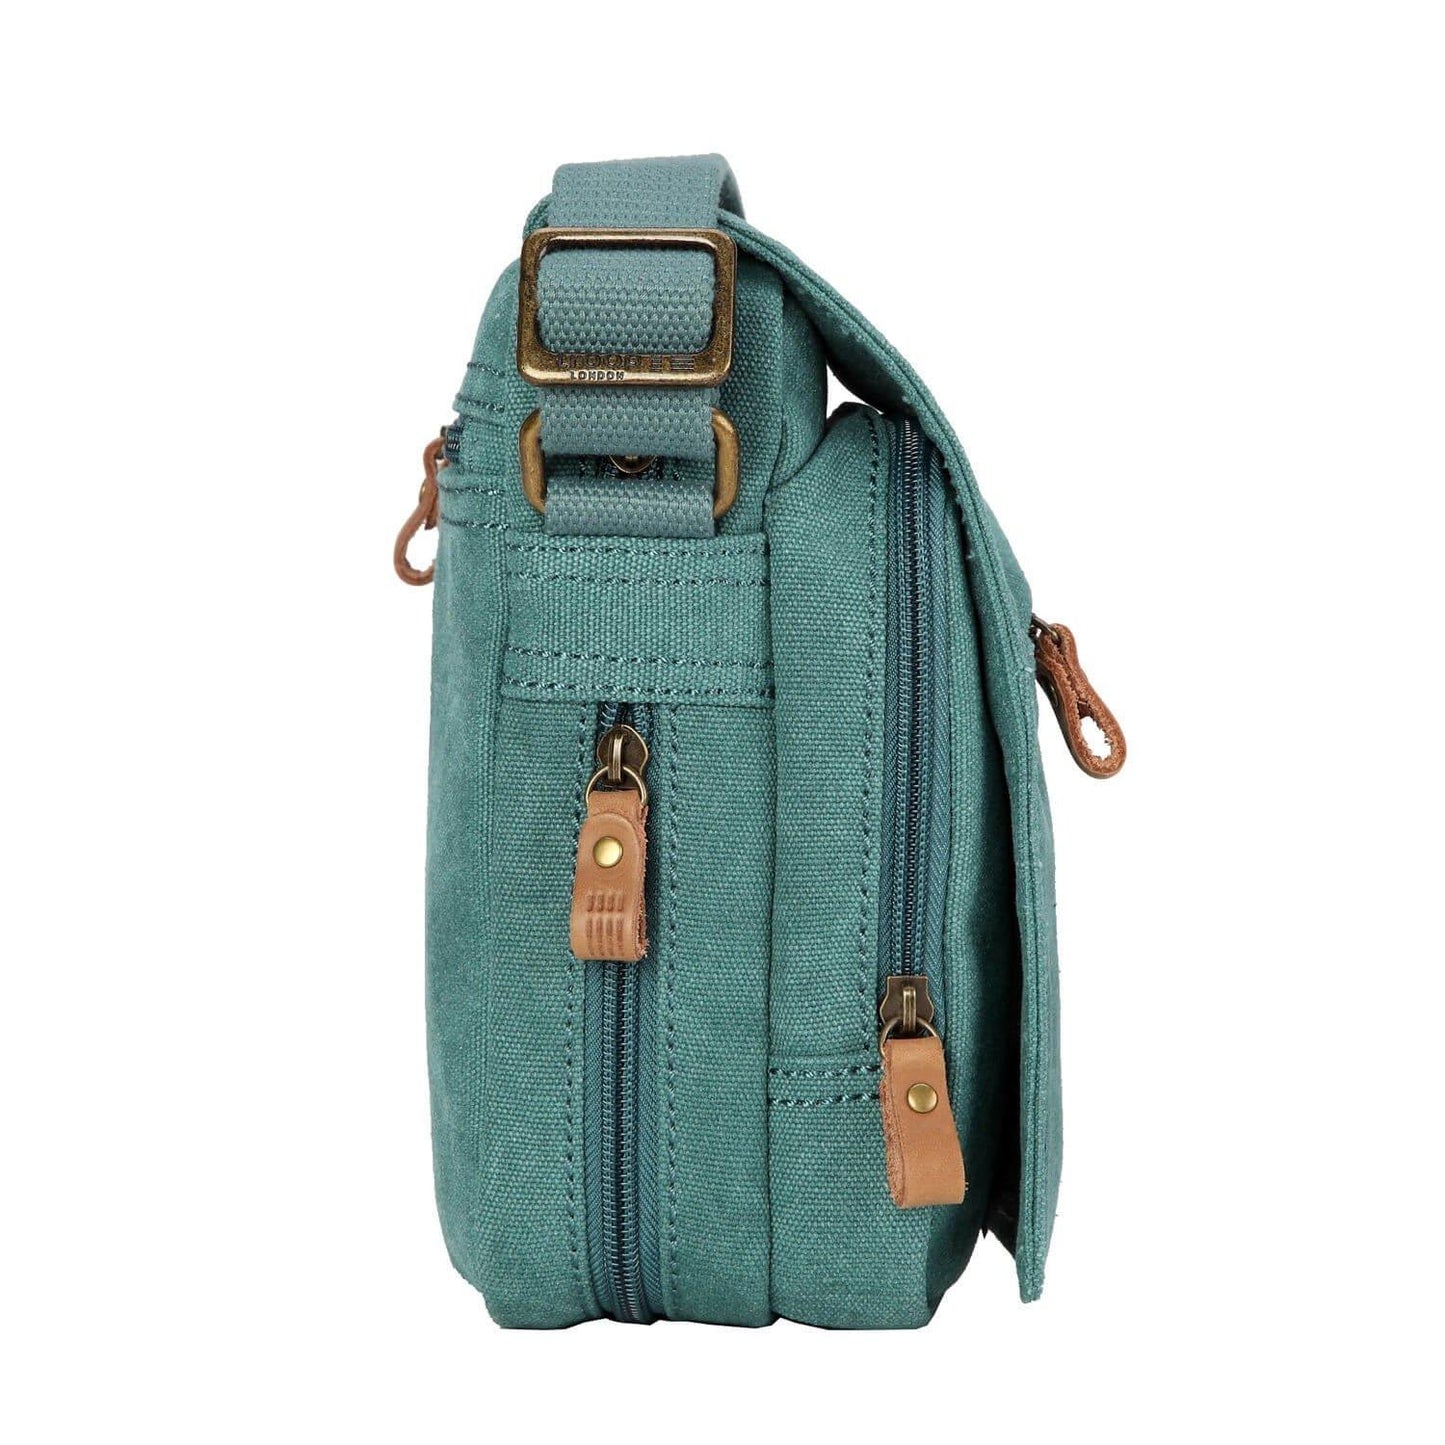 Classic Canvas Across Body Bag - Turquoise | Troop London NZ